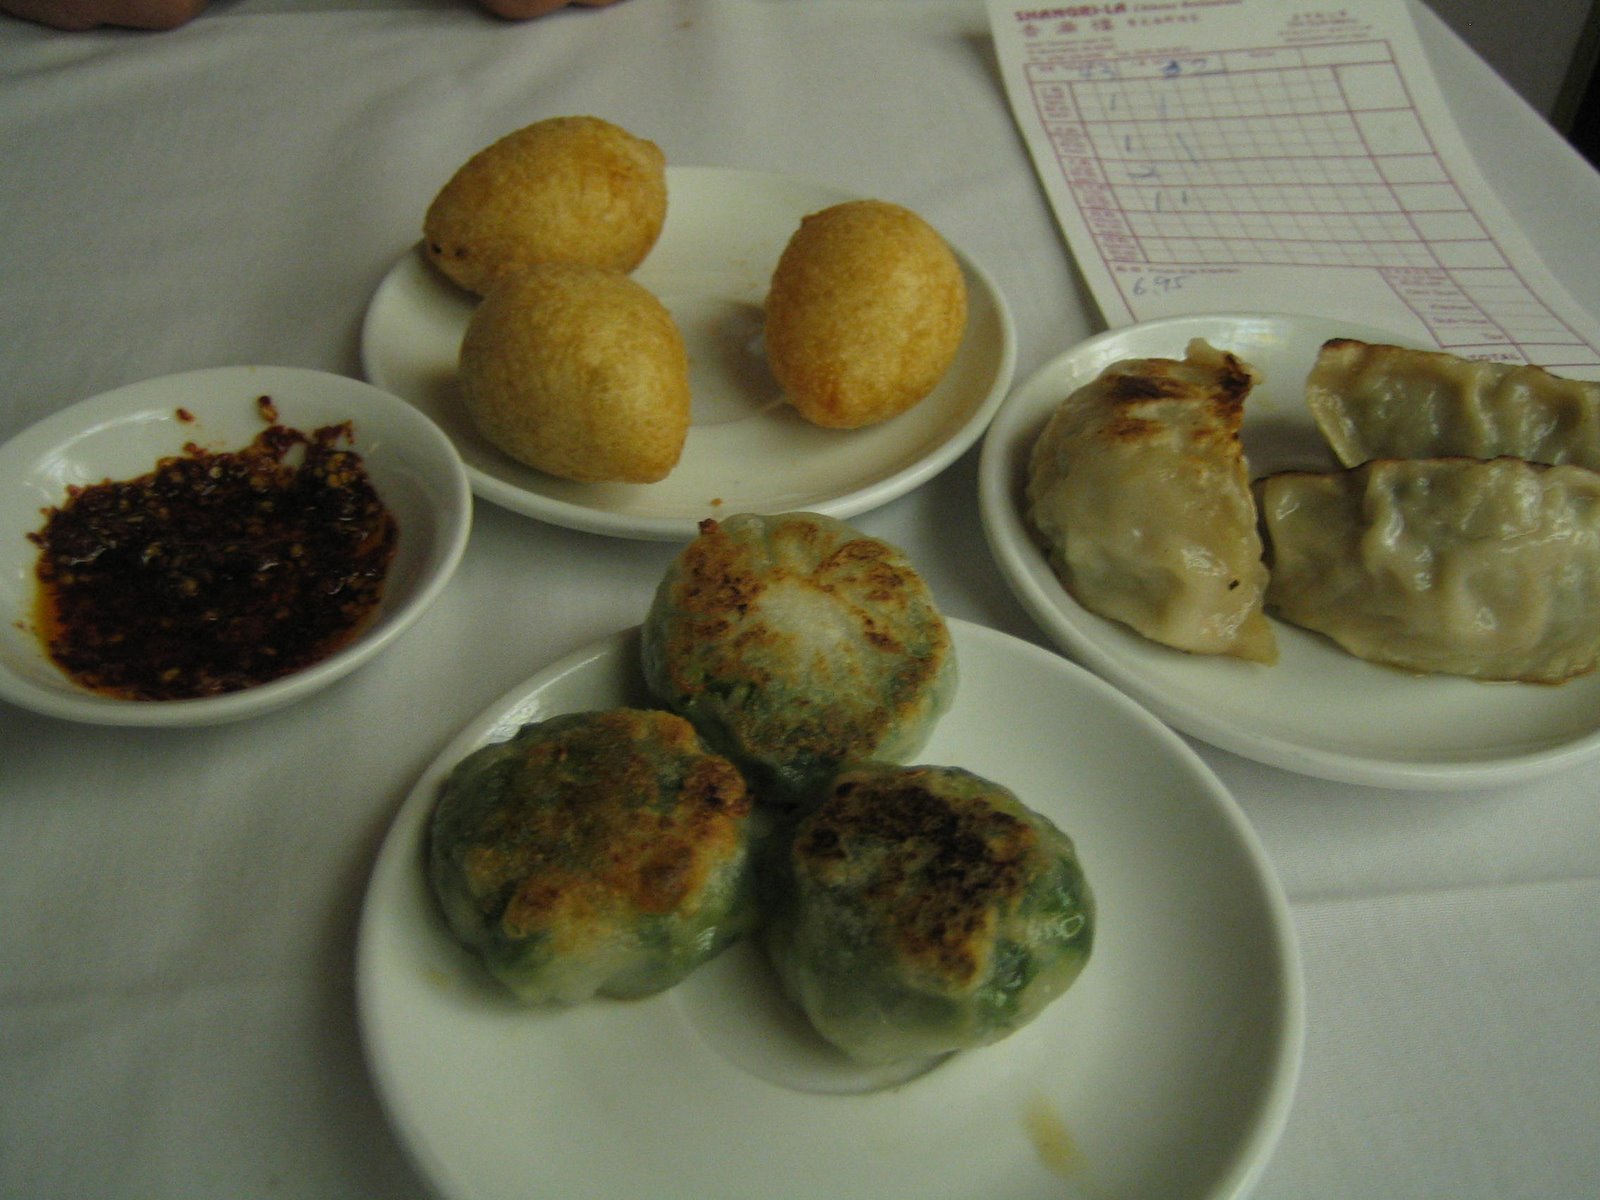 [West+Bloomfield+-+Cantonese+-+Dim+Sum+(chive+and+noodle,+beef+puff,+pork+noodle)+-+Shangrala.JPG]